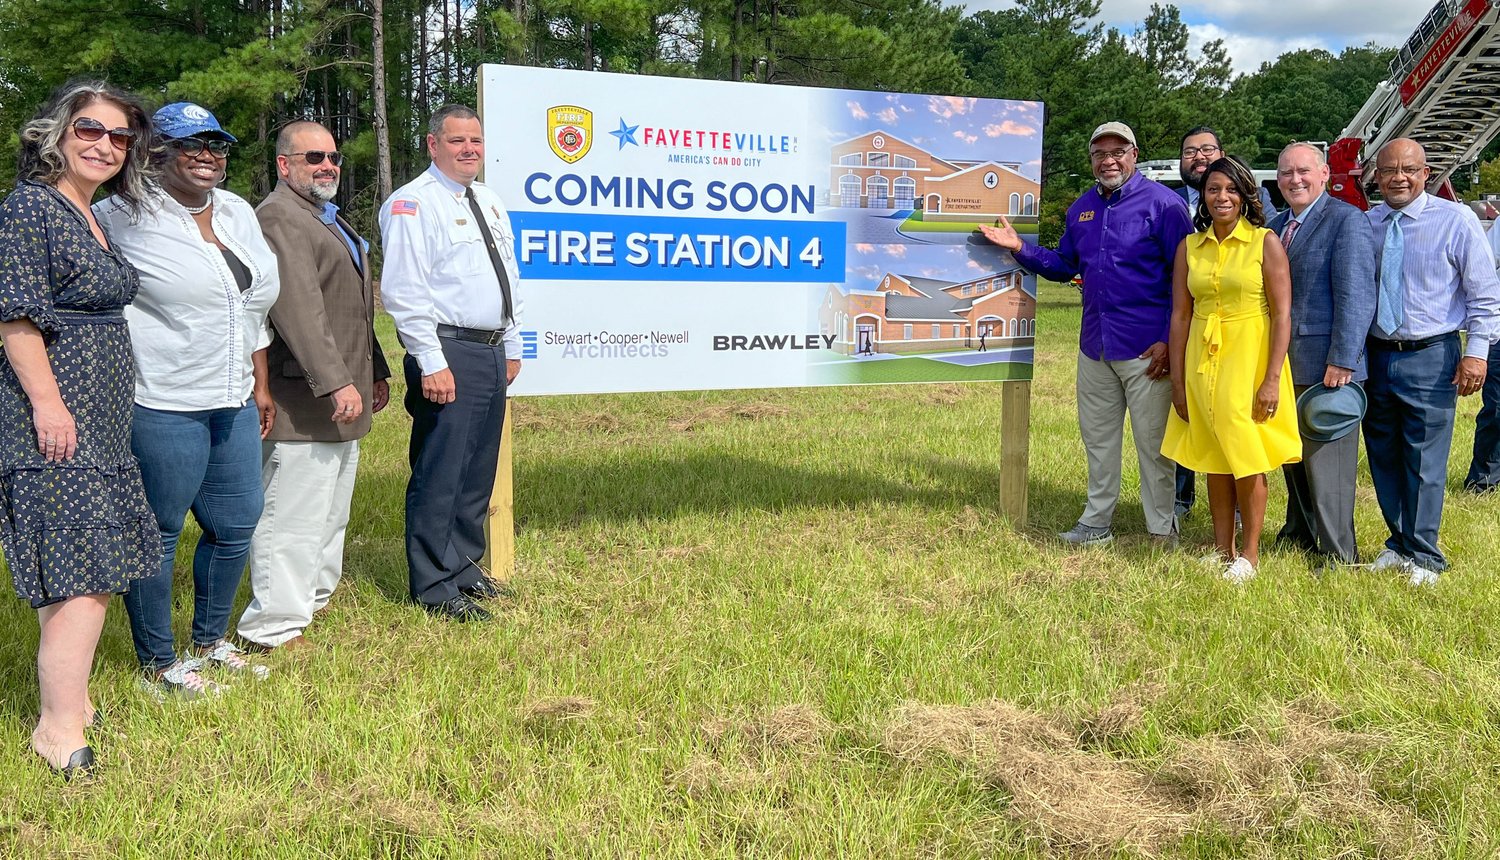 Fayetteville Fire Department officials and City Council members broke ground for a new Fire Station No. 4 on Bragg Boulevard on Tuesday